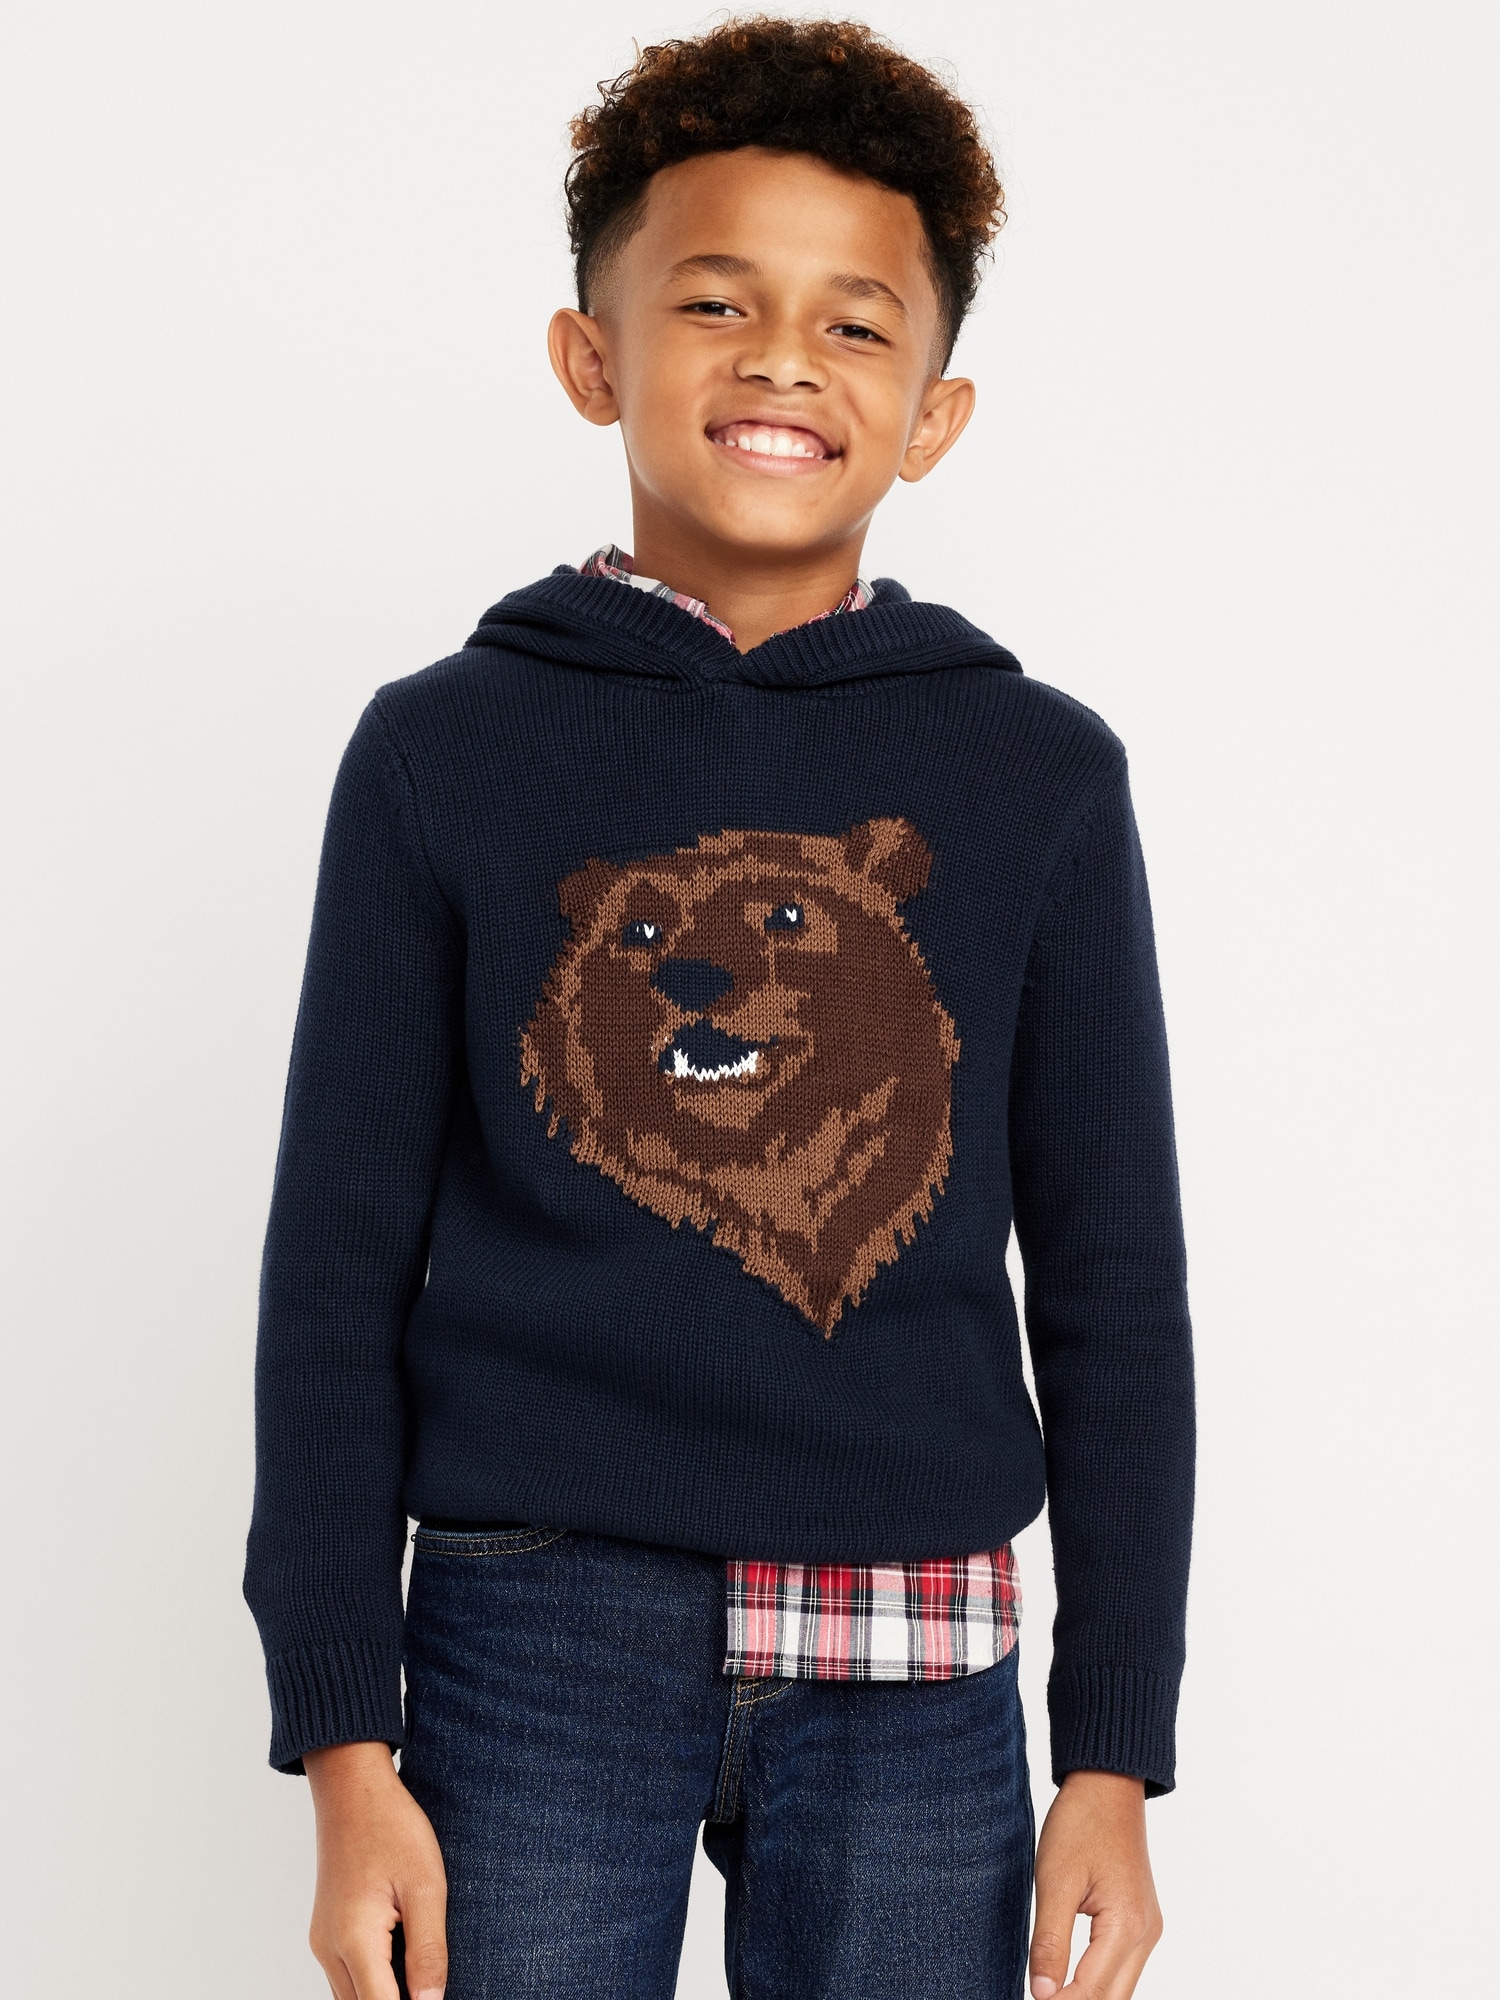 Printed Sweater-Knit Pullover Hoodie for Boys